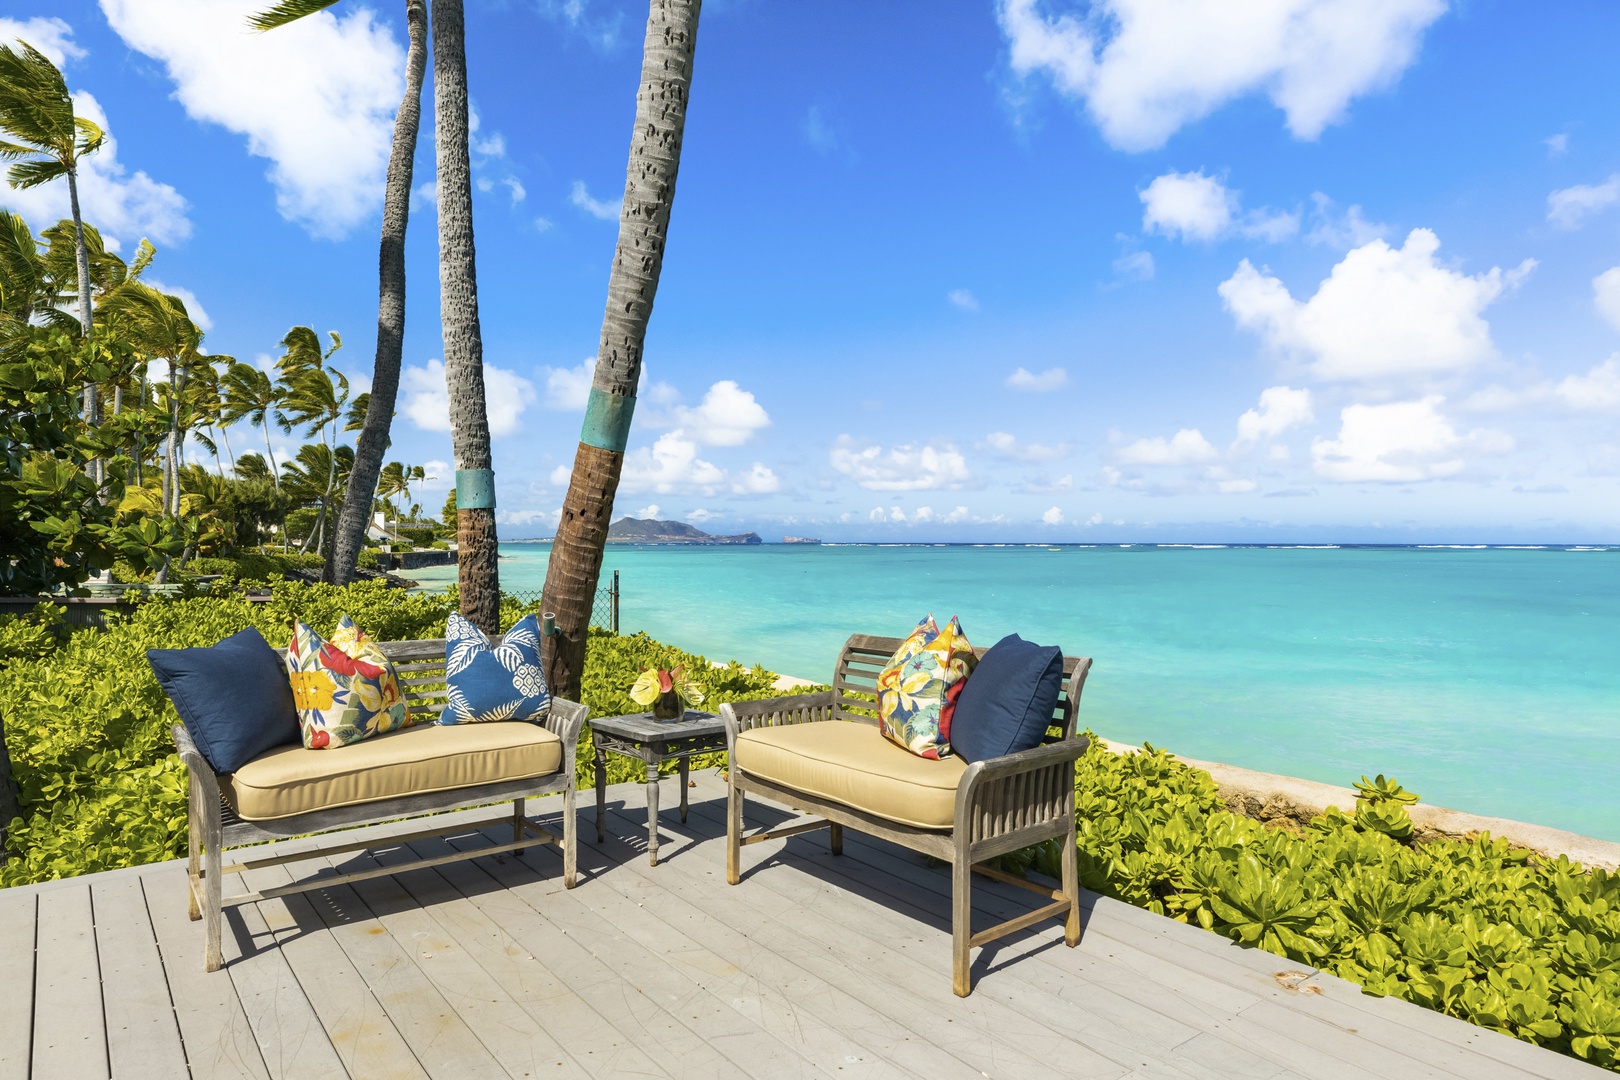 Kailua Vacation Rentals, Mokulua Sunrise - With unobstructed views of the sparkling ocean and Mokulua Islands, you'll feel as though you're on your own private isle